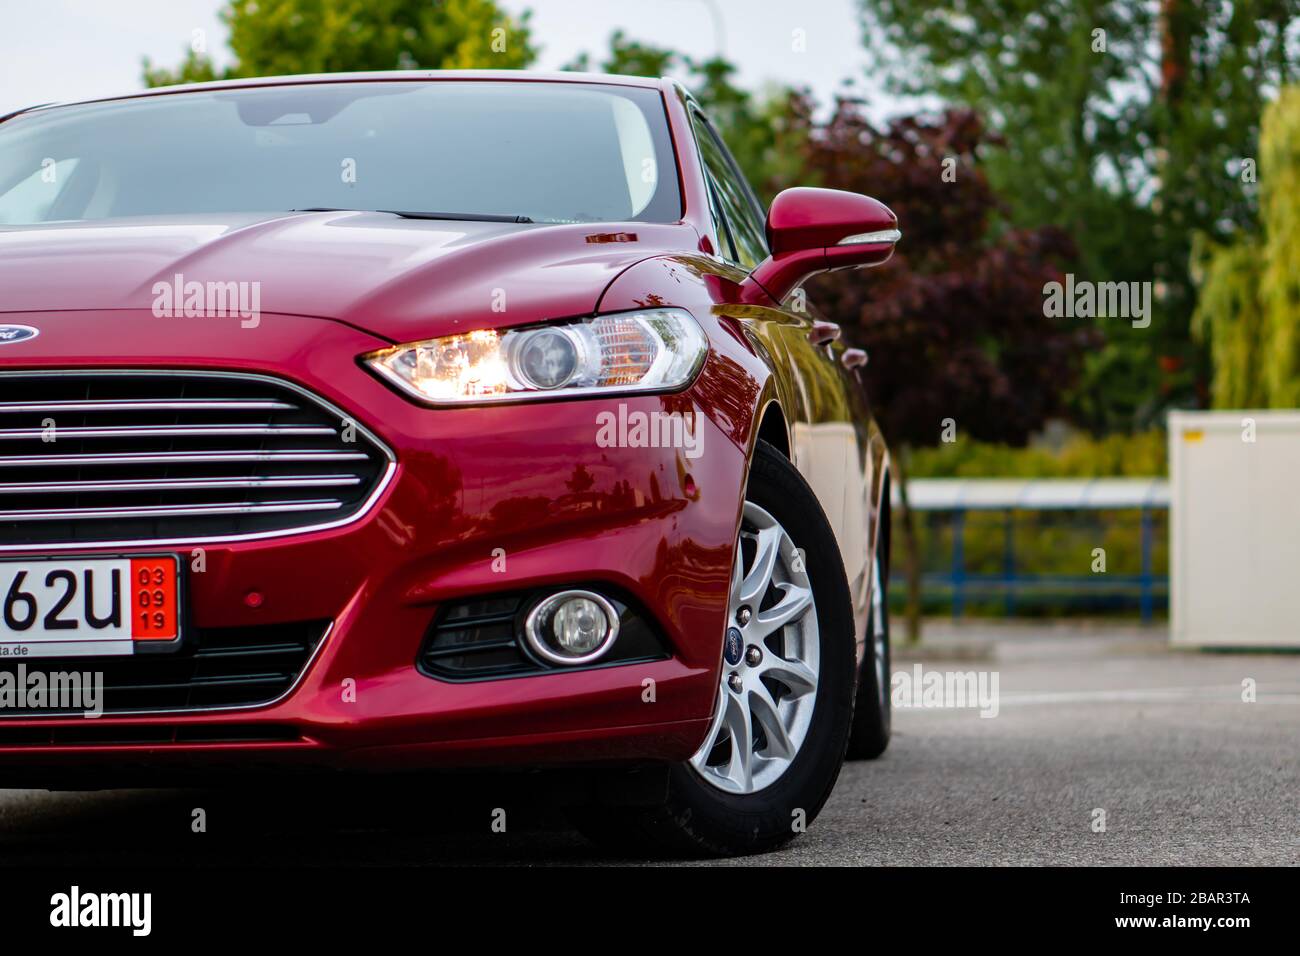 Ford Mondeo MK5 Titanium trim, in Ruby red coloud, sedan, photosession in  an empty parking lot. Isolated car, nice photos Stock Photo - Alamy